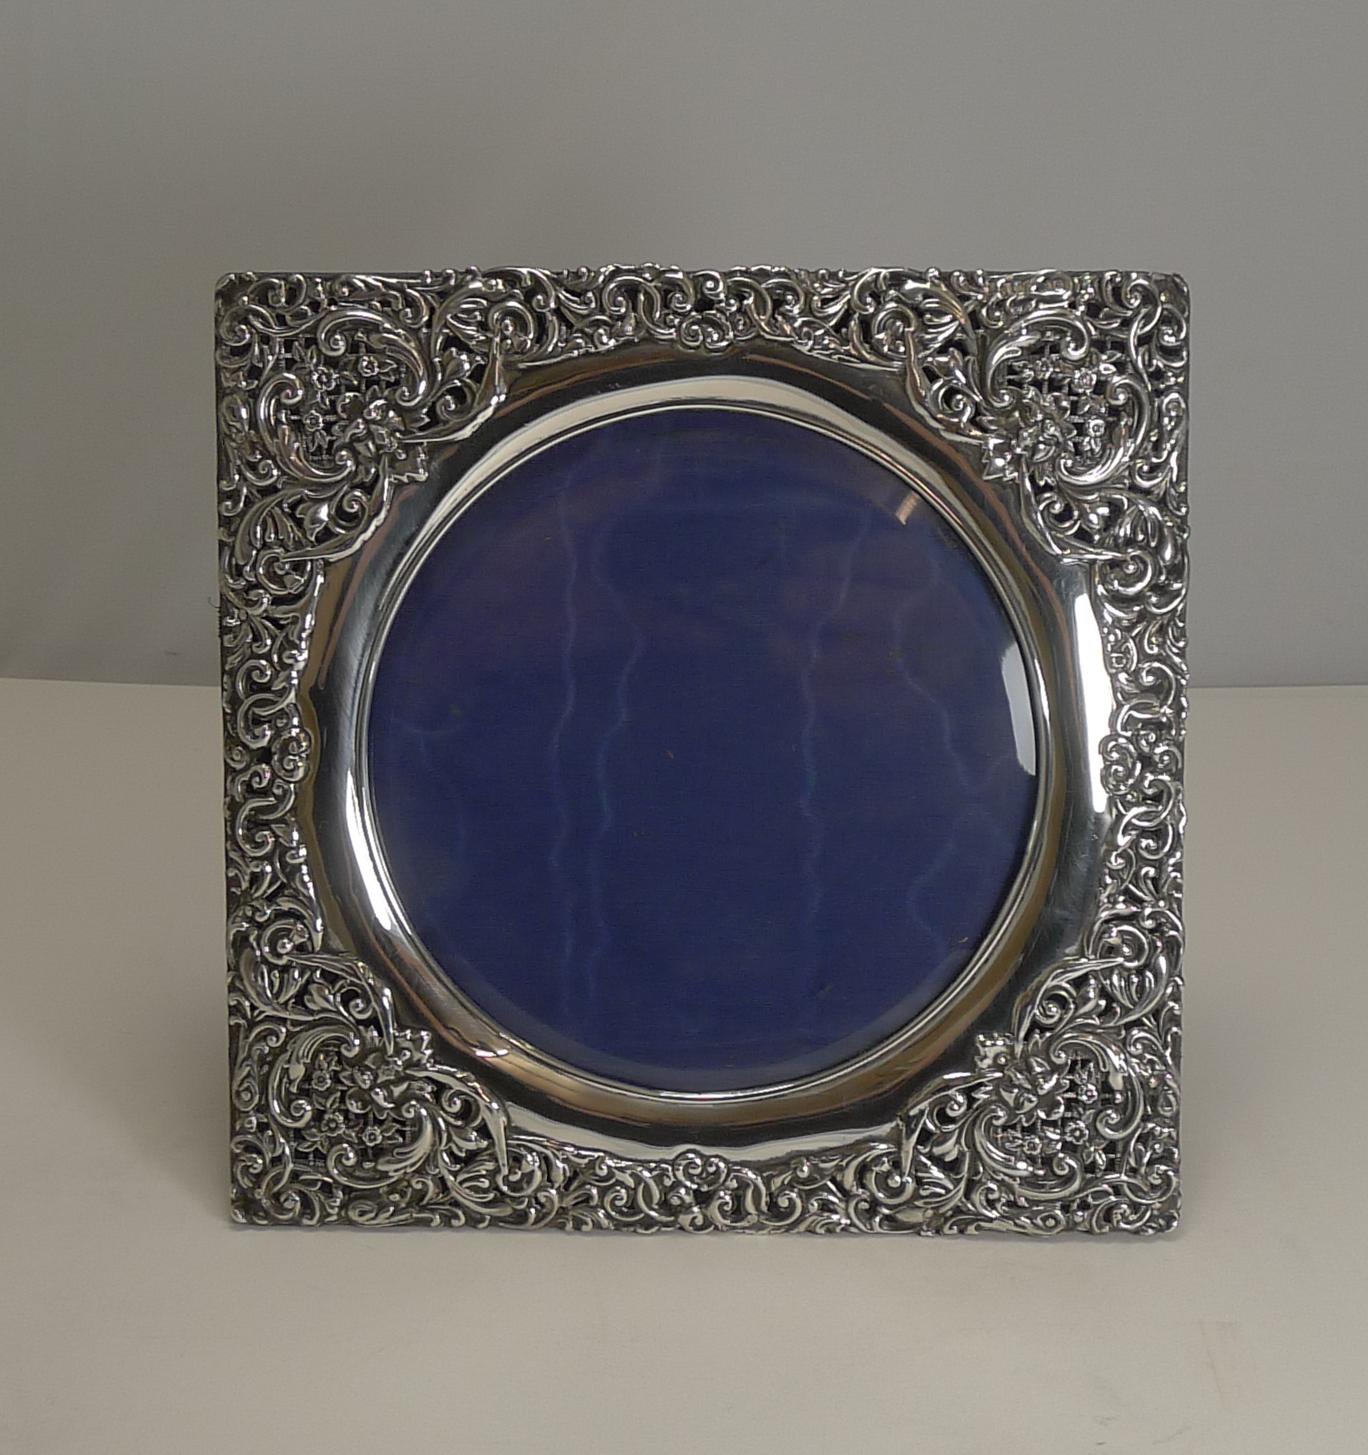 A stunning Edwardian photograph frame made from pierced or reticulated sterling silver, beautifully decorated with a mythical face in each corner surrounded with floral and foliate motifs, with hand chased highlights.

The square frame has a